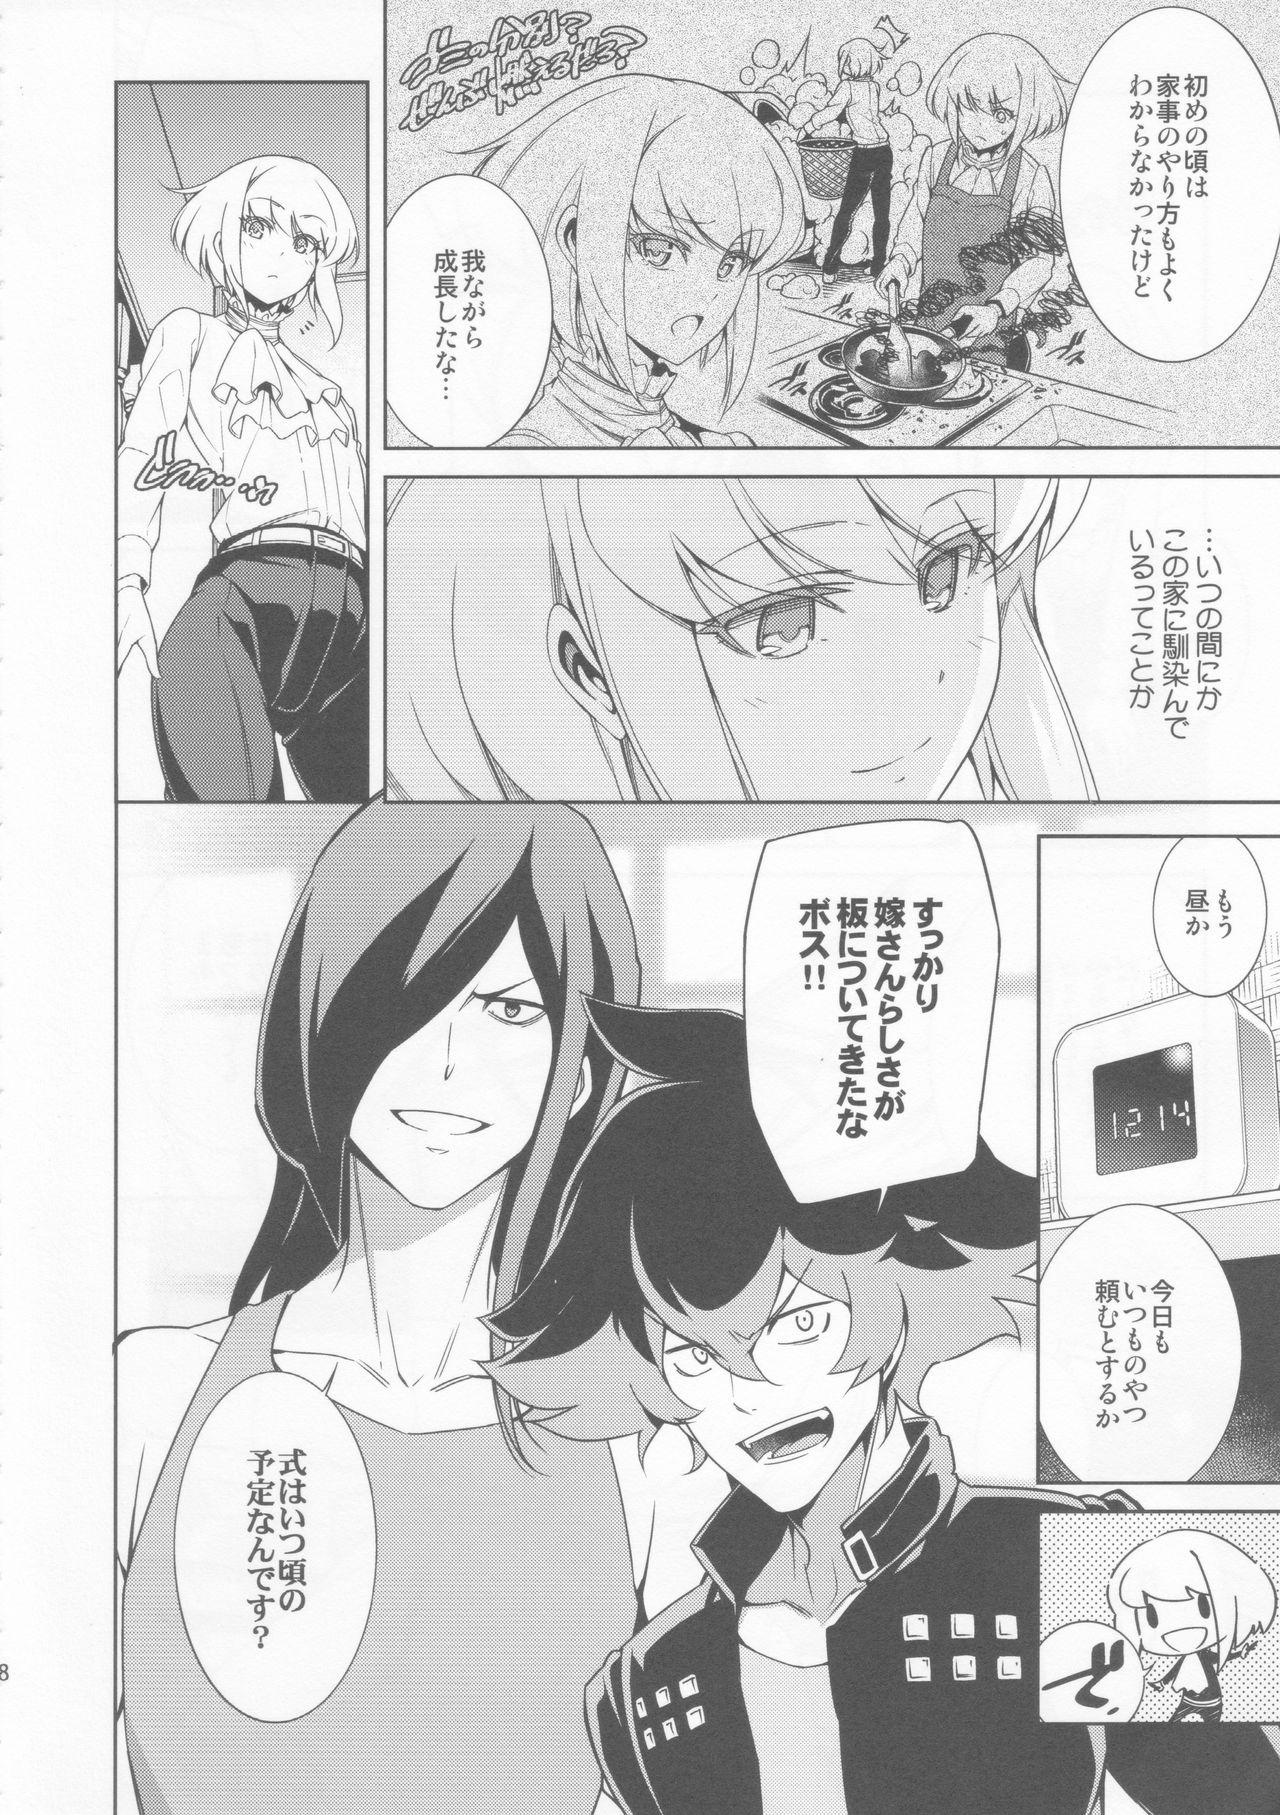 Assfingering PROMISED PROPOSE - Promare One - Page 7